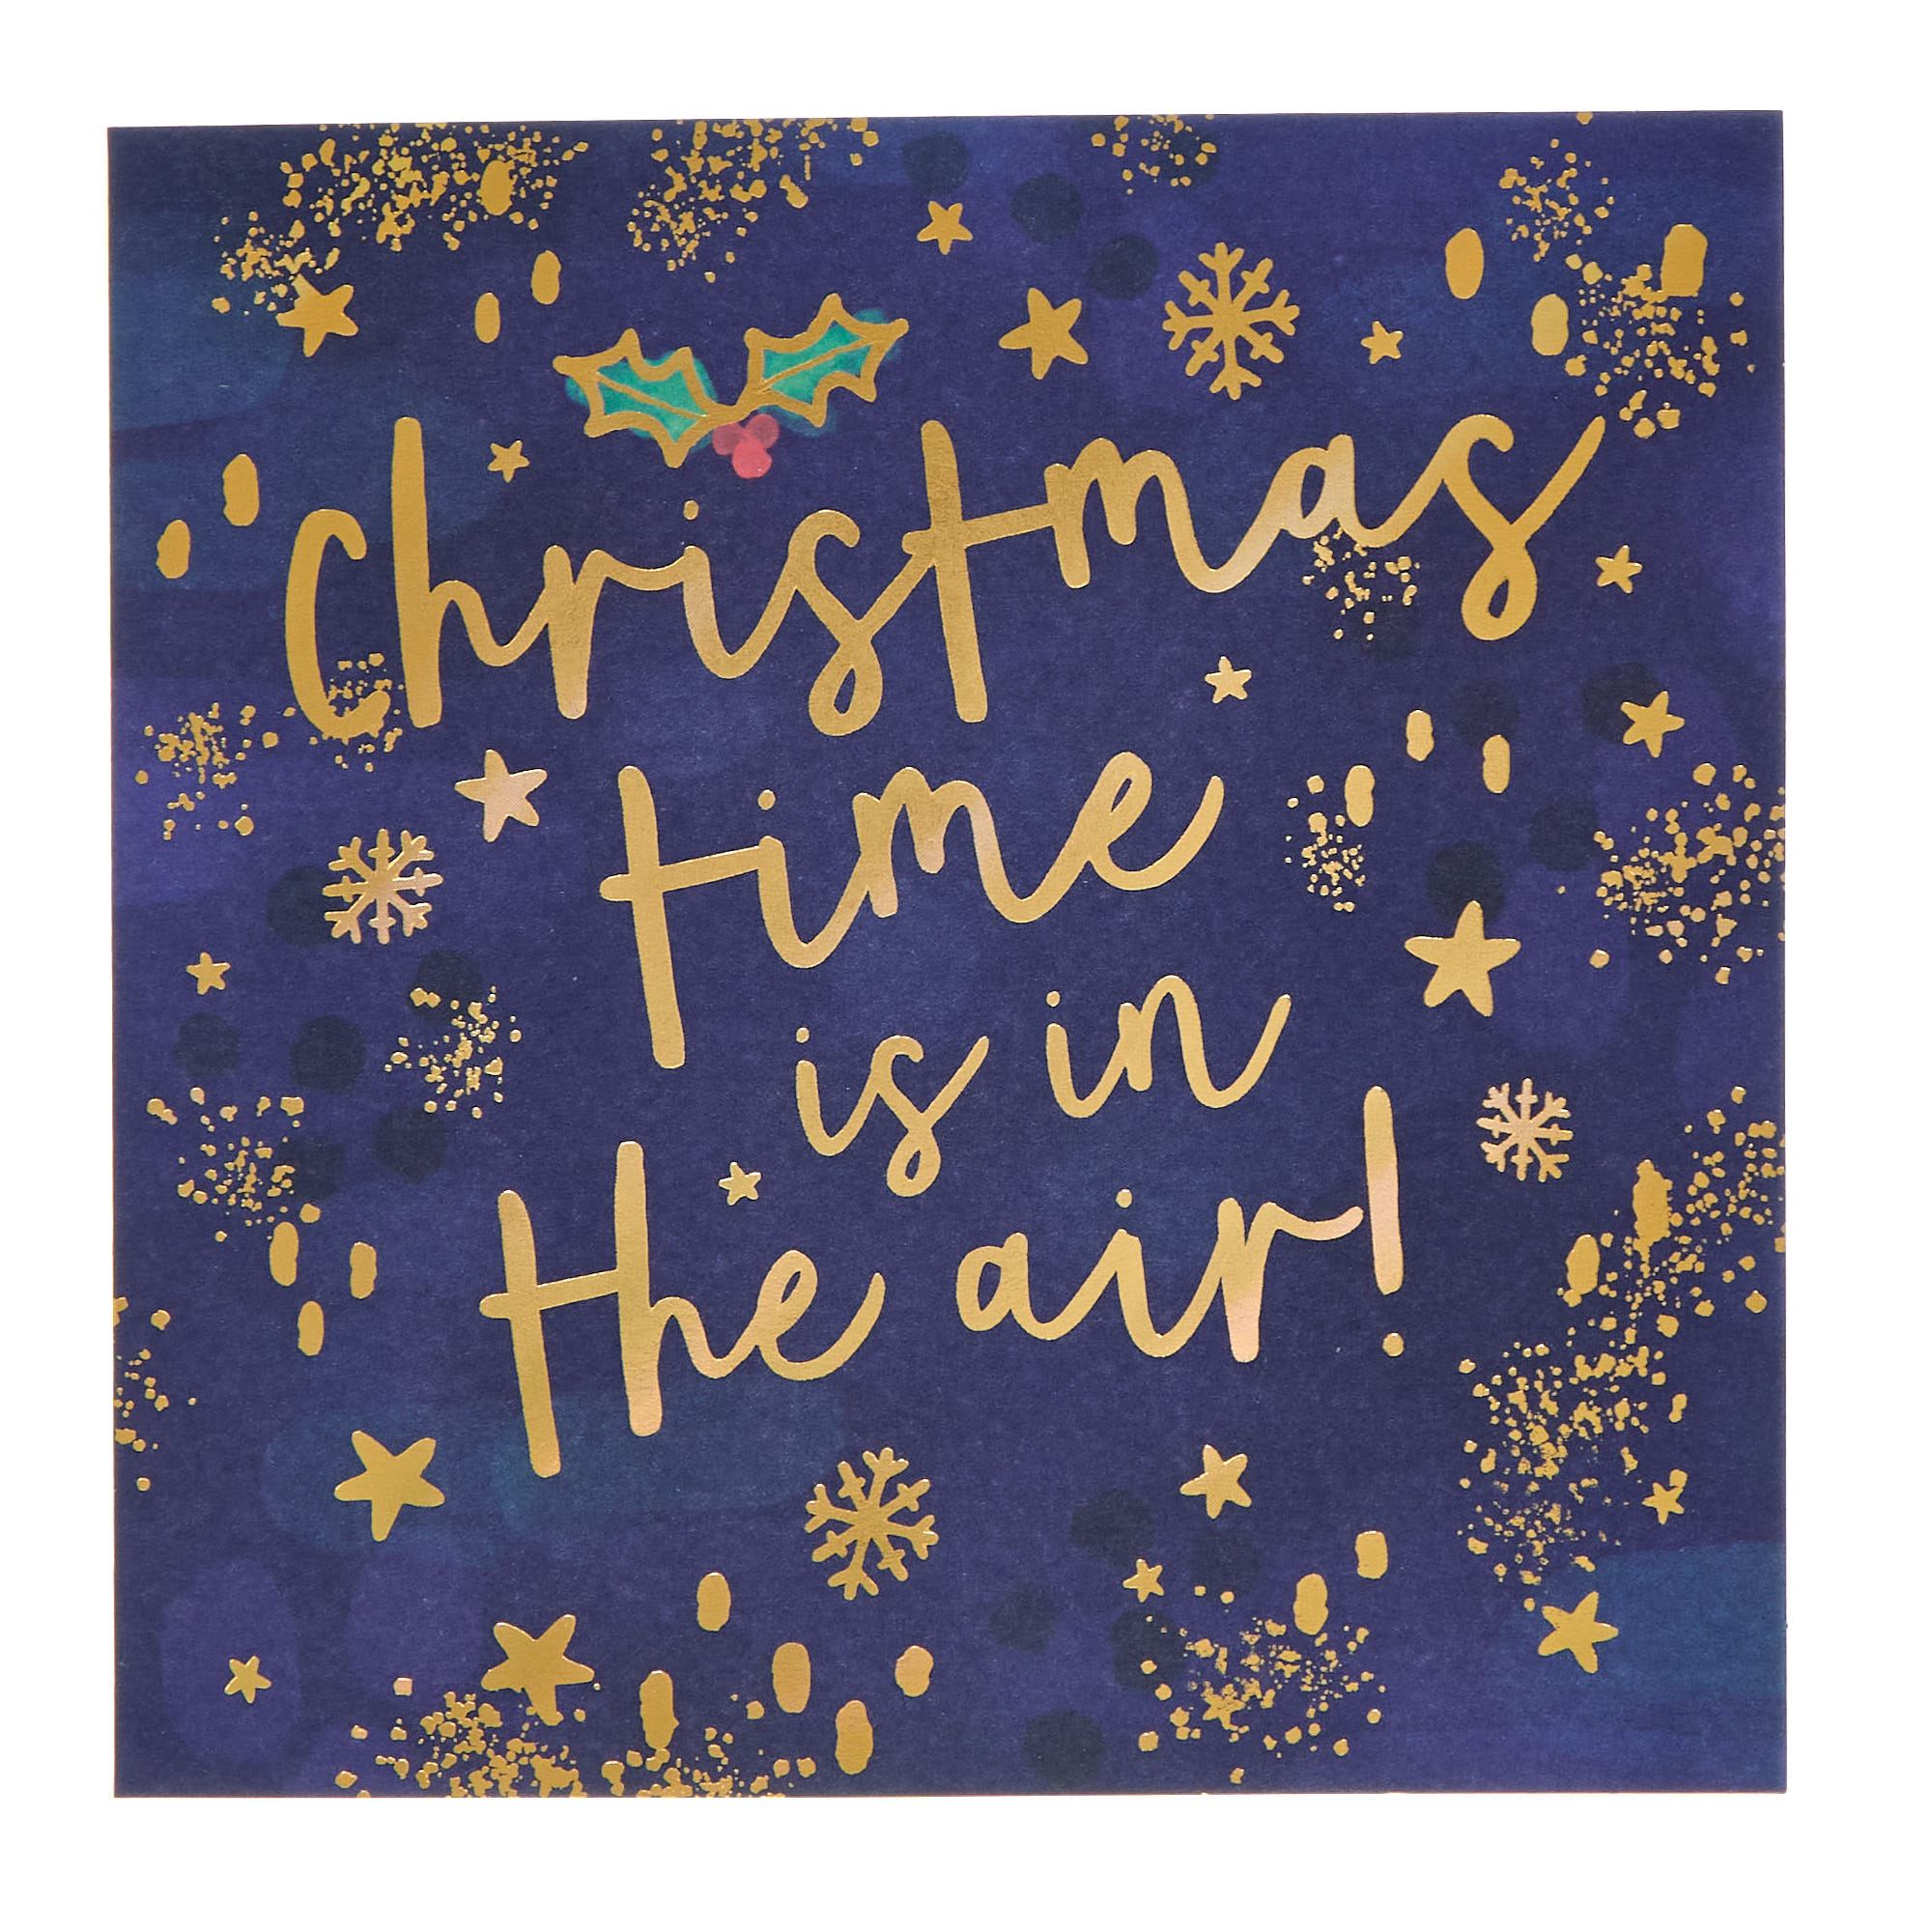 16 Charity Christmas Cards - Gold Foil Writing (2 Designs)